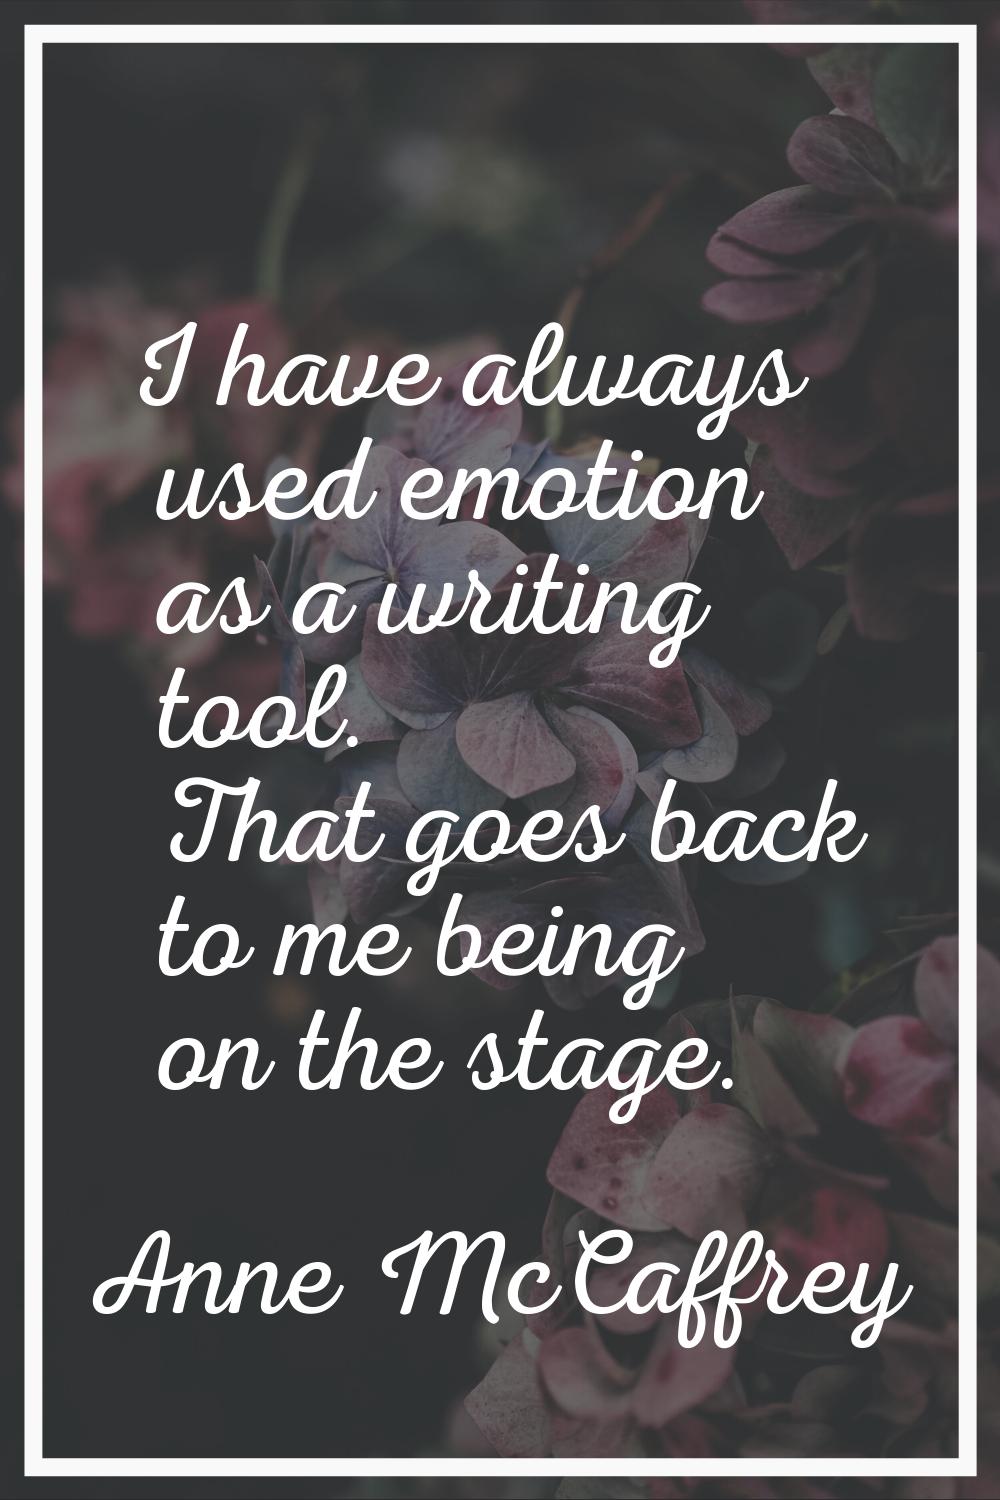 I have always used emotion as a writing tool. That goes back to me being on the stage.